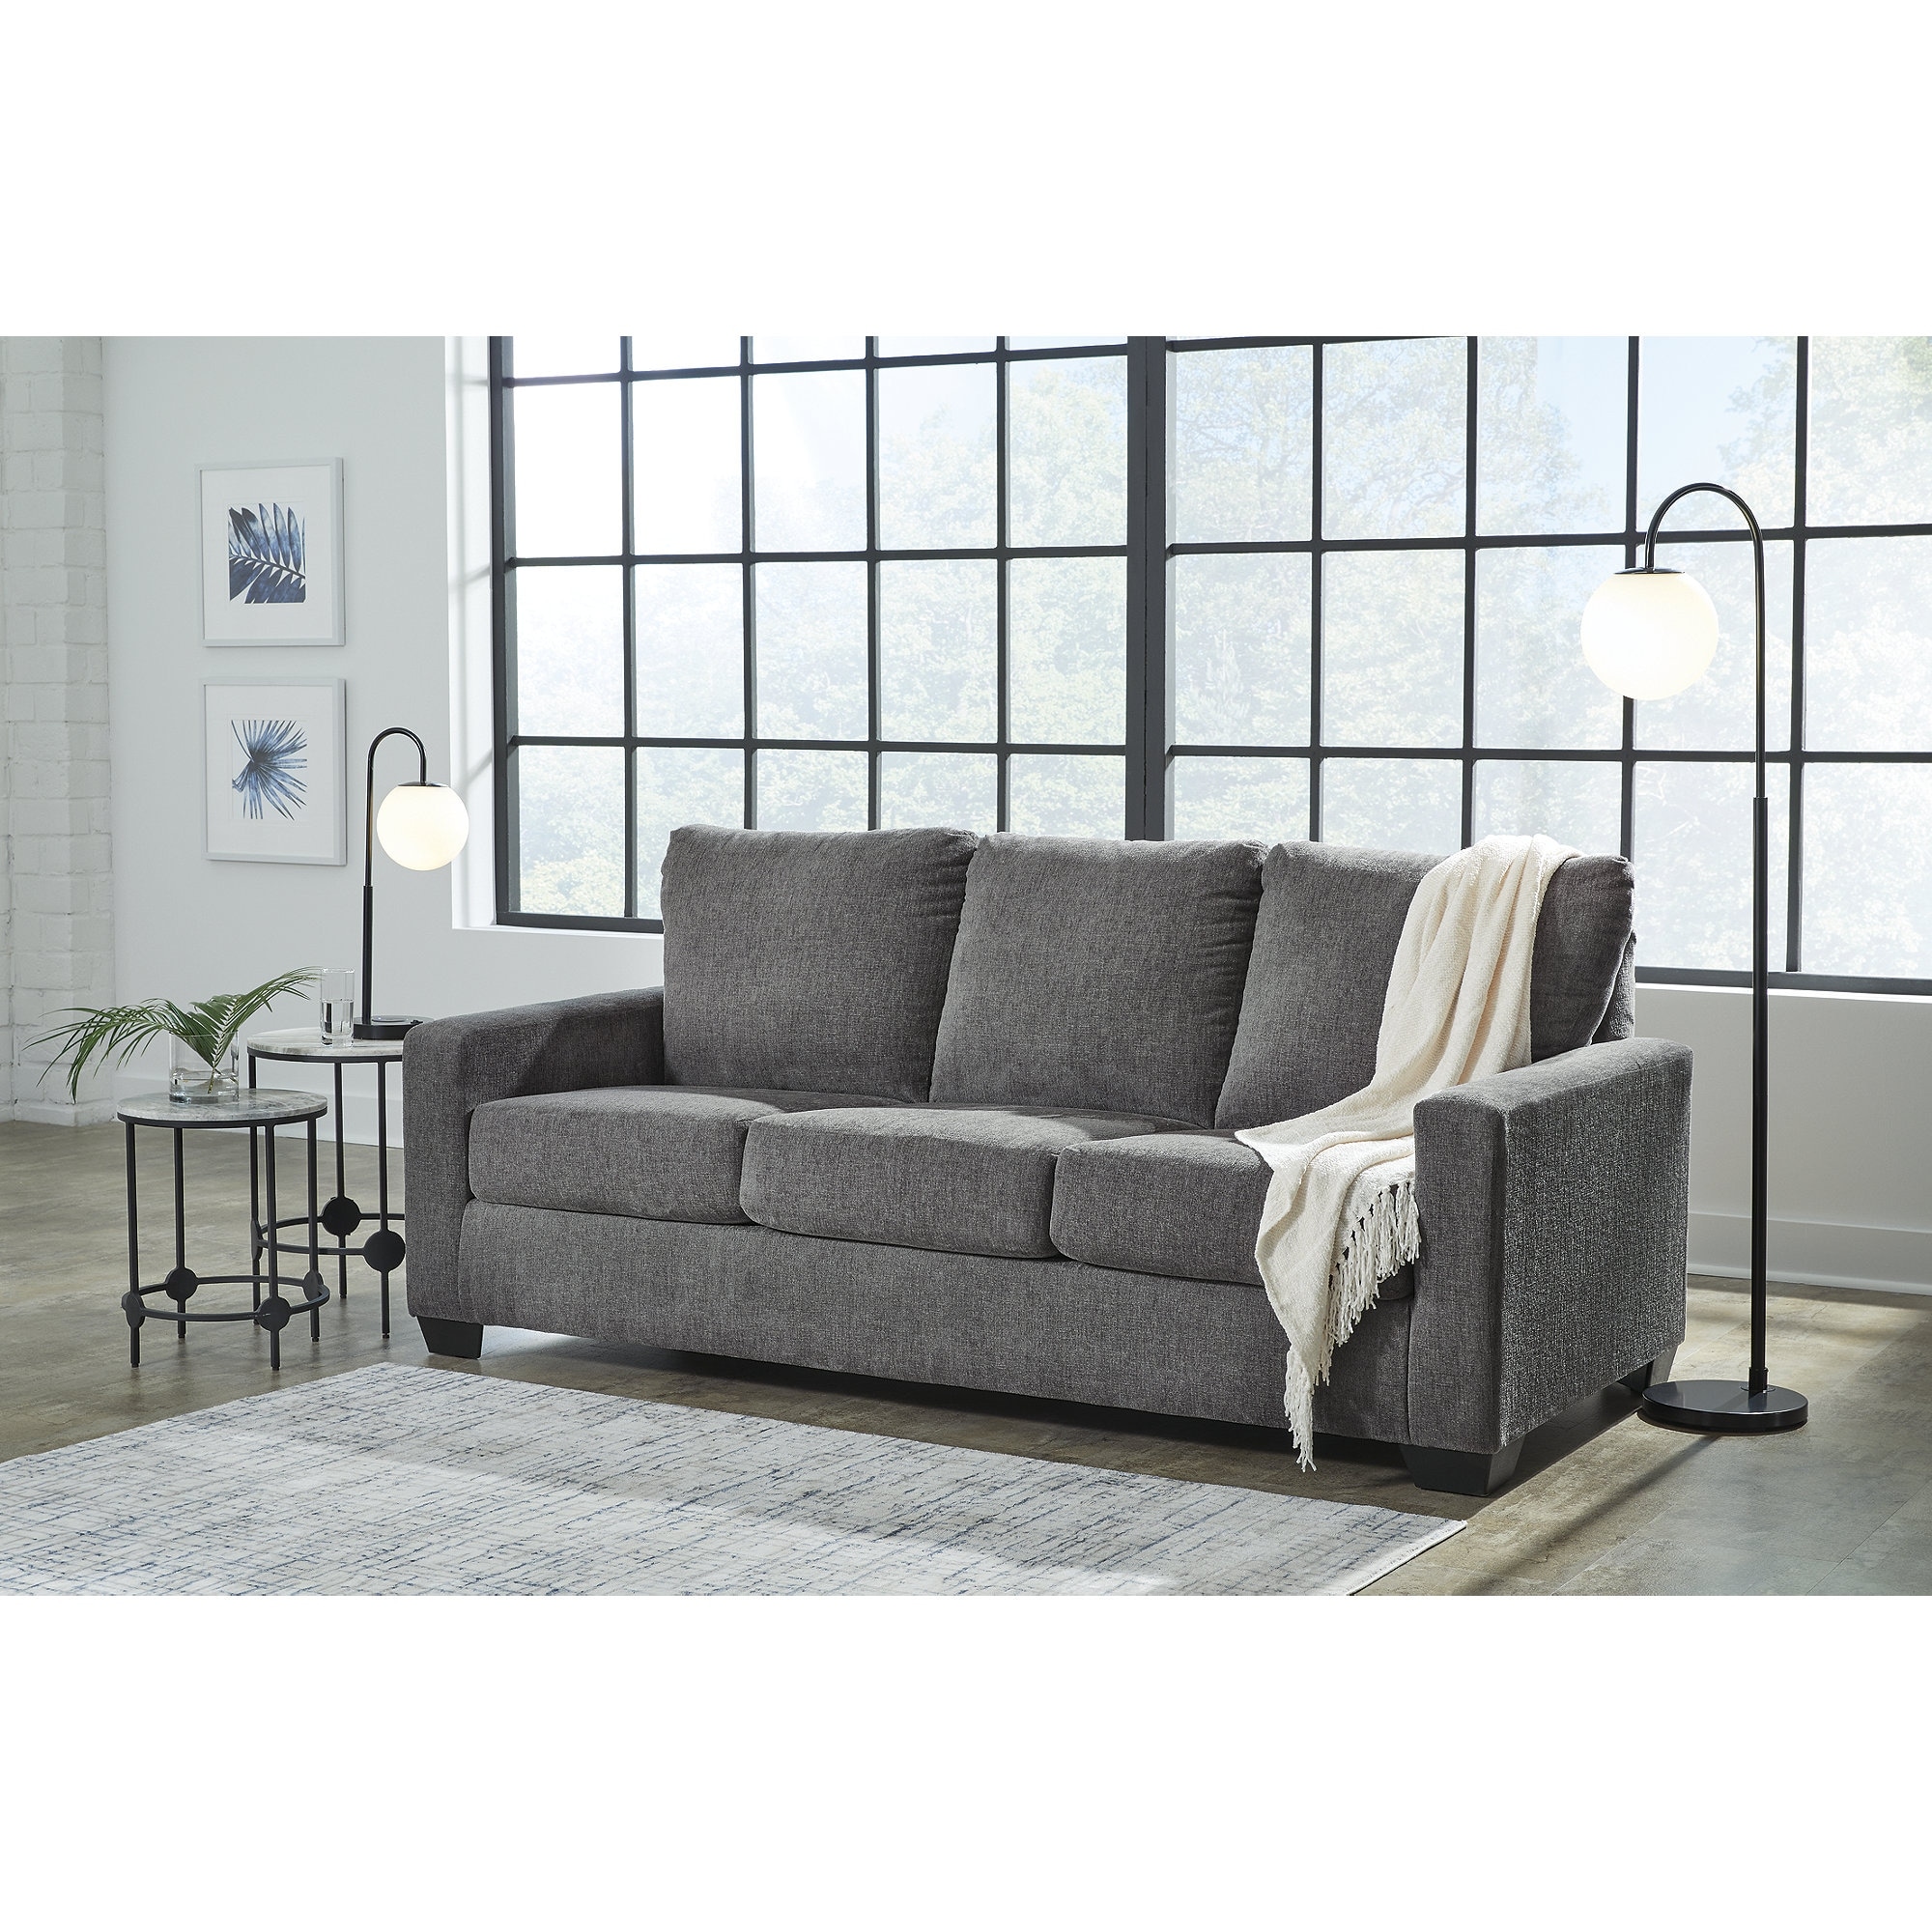 Signature Design by Ashley Sofa Beds - Bed Bath & Beyond